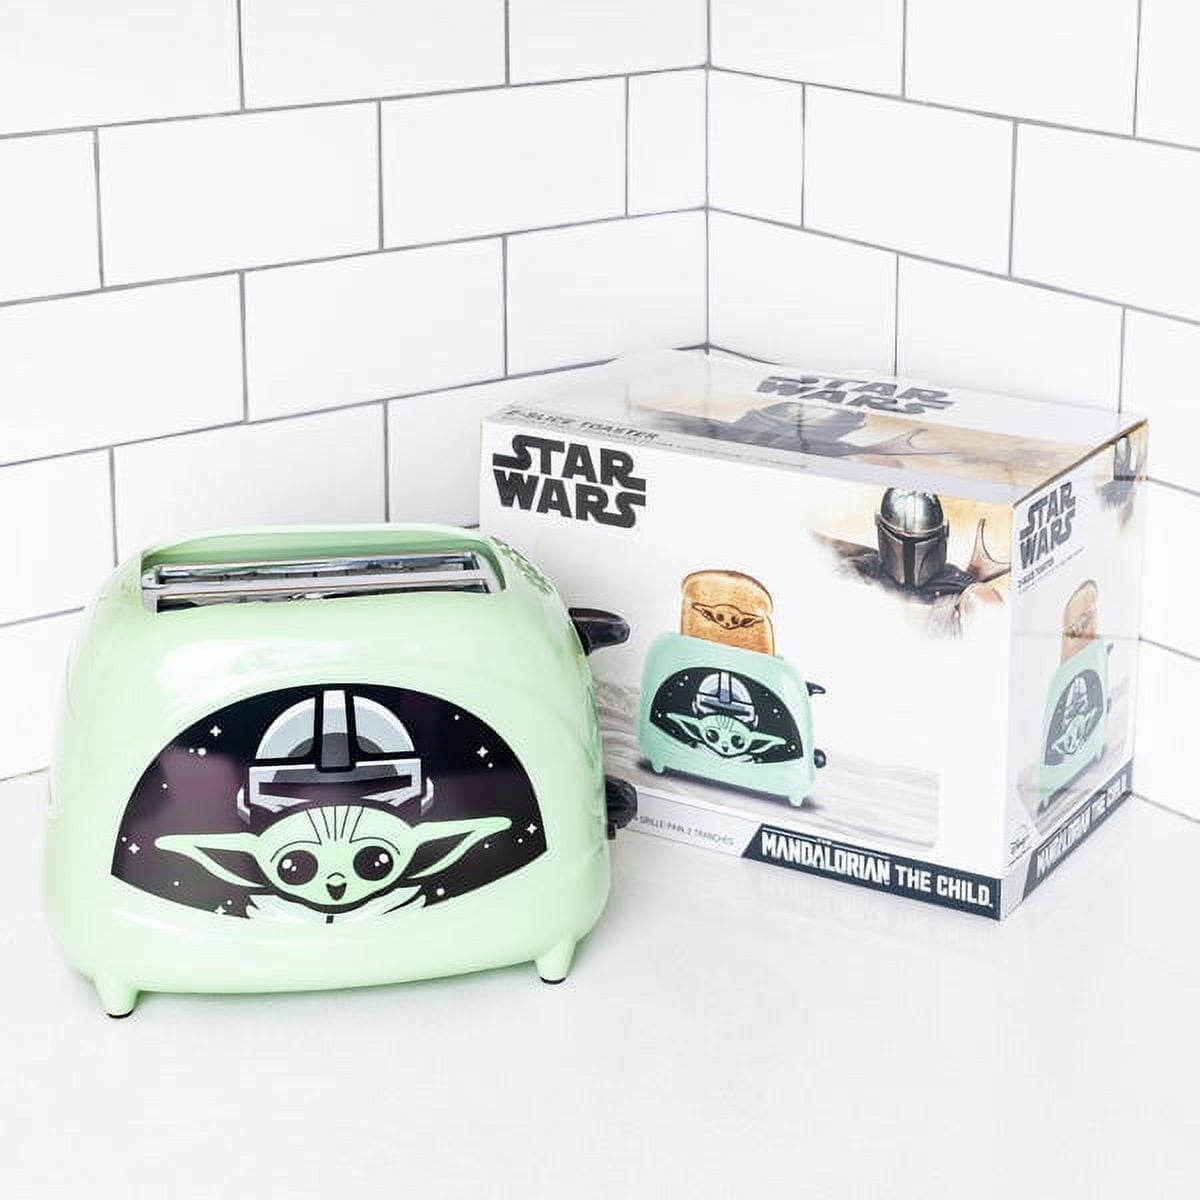  Uncanny Brands The Mandalorian Grilled Cheese Maker- Panini  Press and Compact Indoor Grill- Baby Yoda and Mando Sandwich: Home & Kitchen